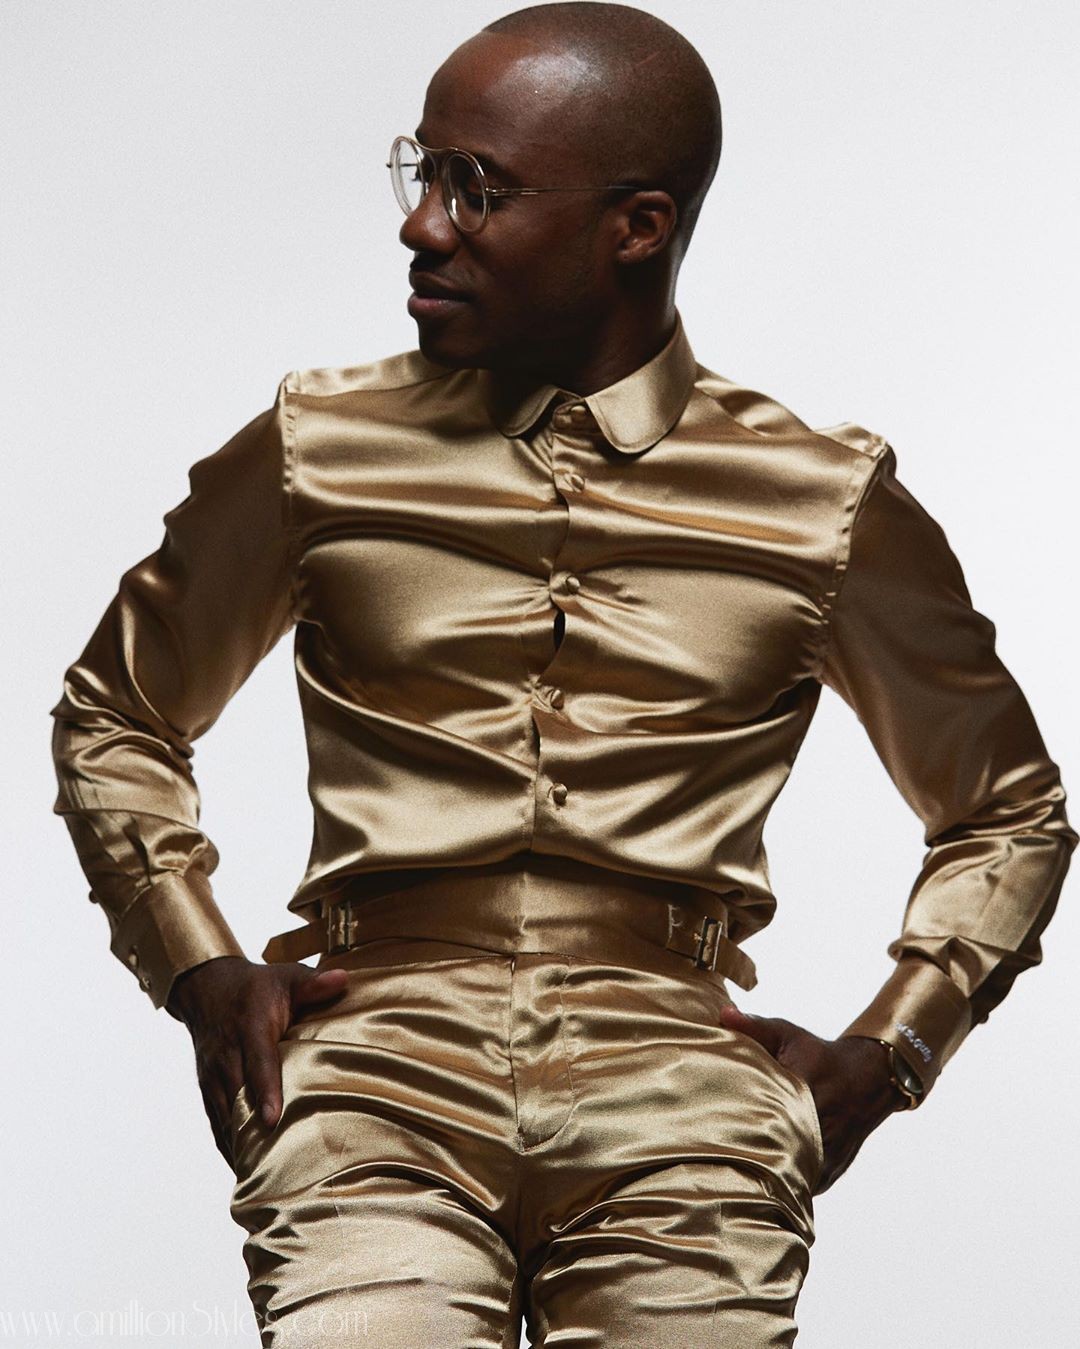 Garcon Couture Redefines Menswear With A Twist On Modern Looks